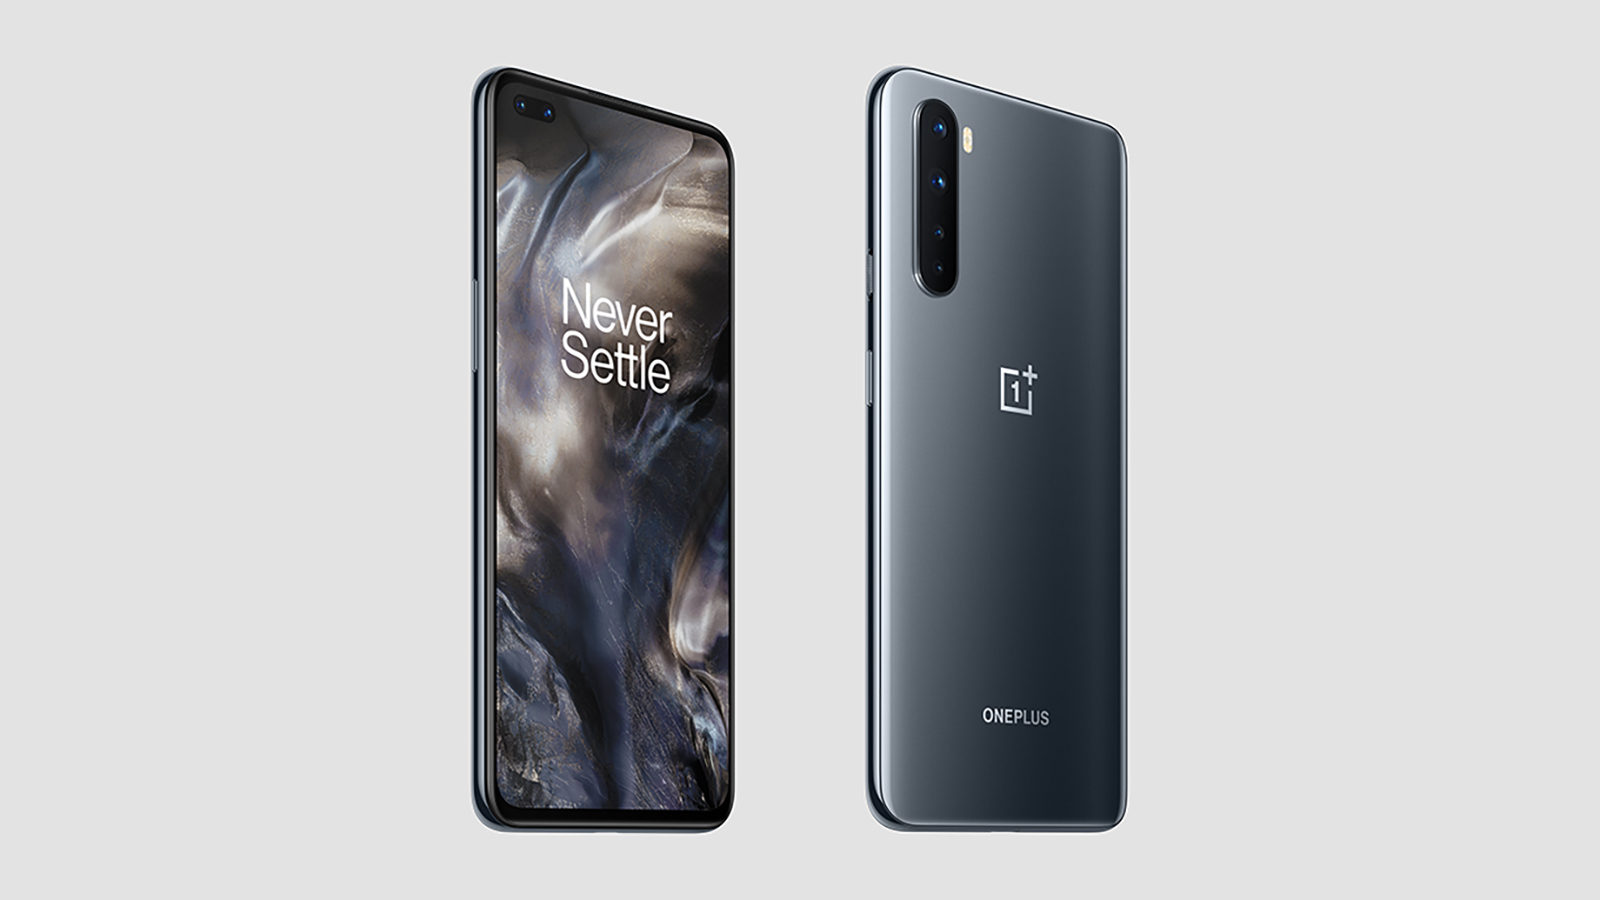 Ван плюс 3. One Plus Nord 5g. ONEPLUS Nord n10 5g 6gb/128gb. One Plus Nord ce 5g. ONEPLUS Nord 2 5g 8/128gb.